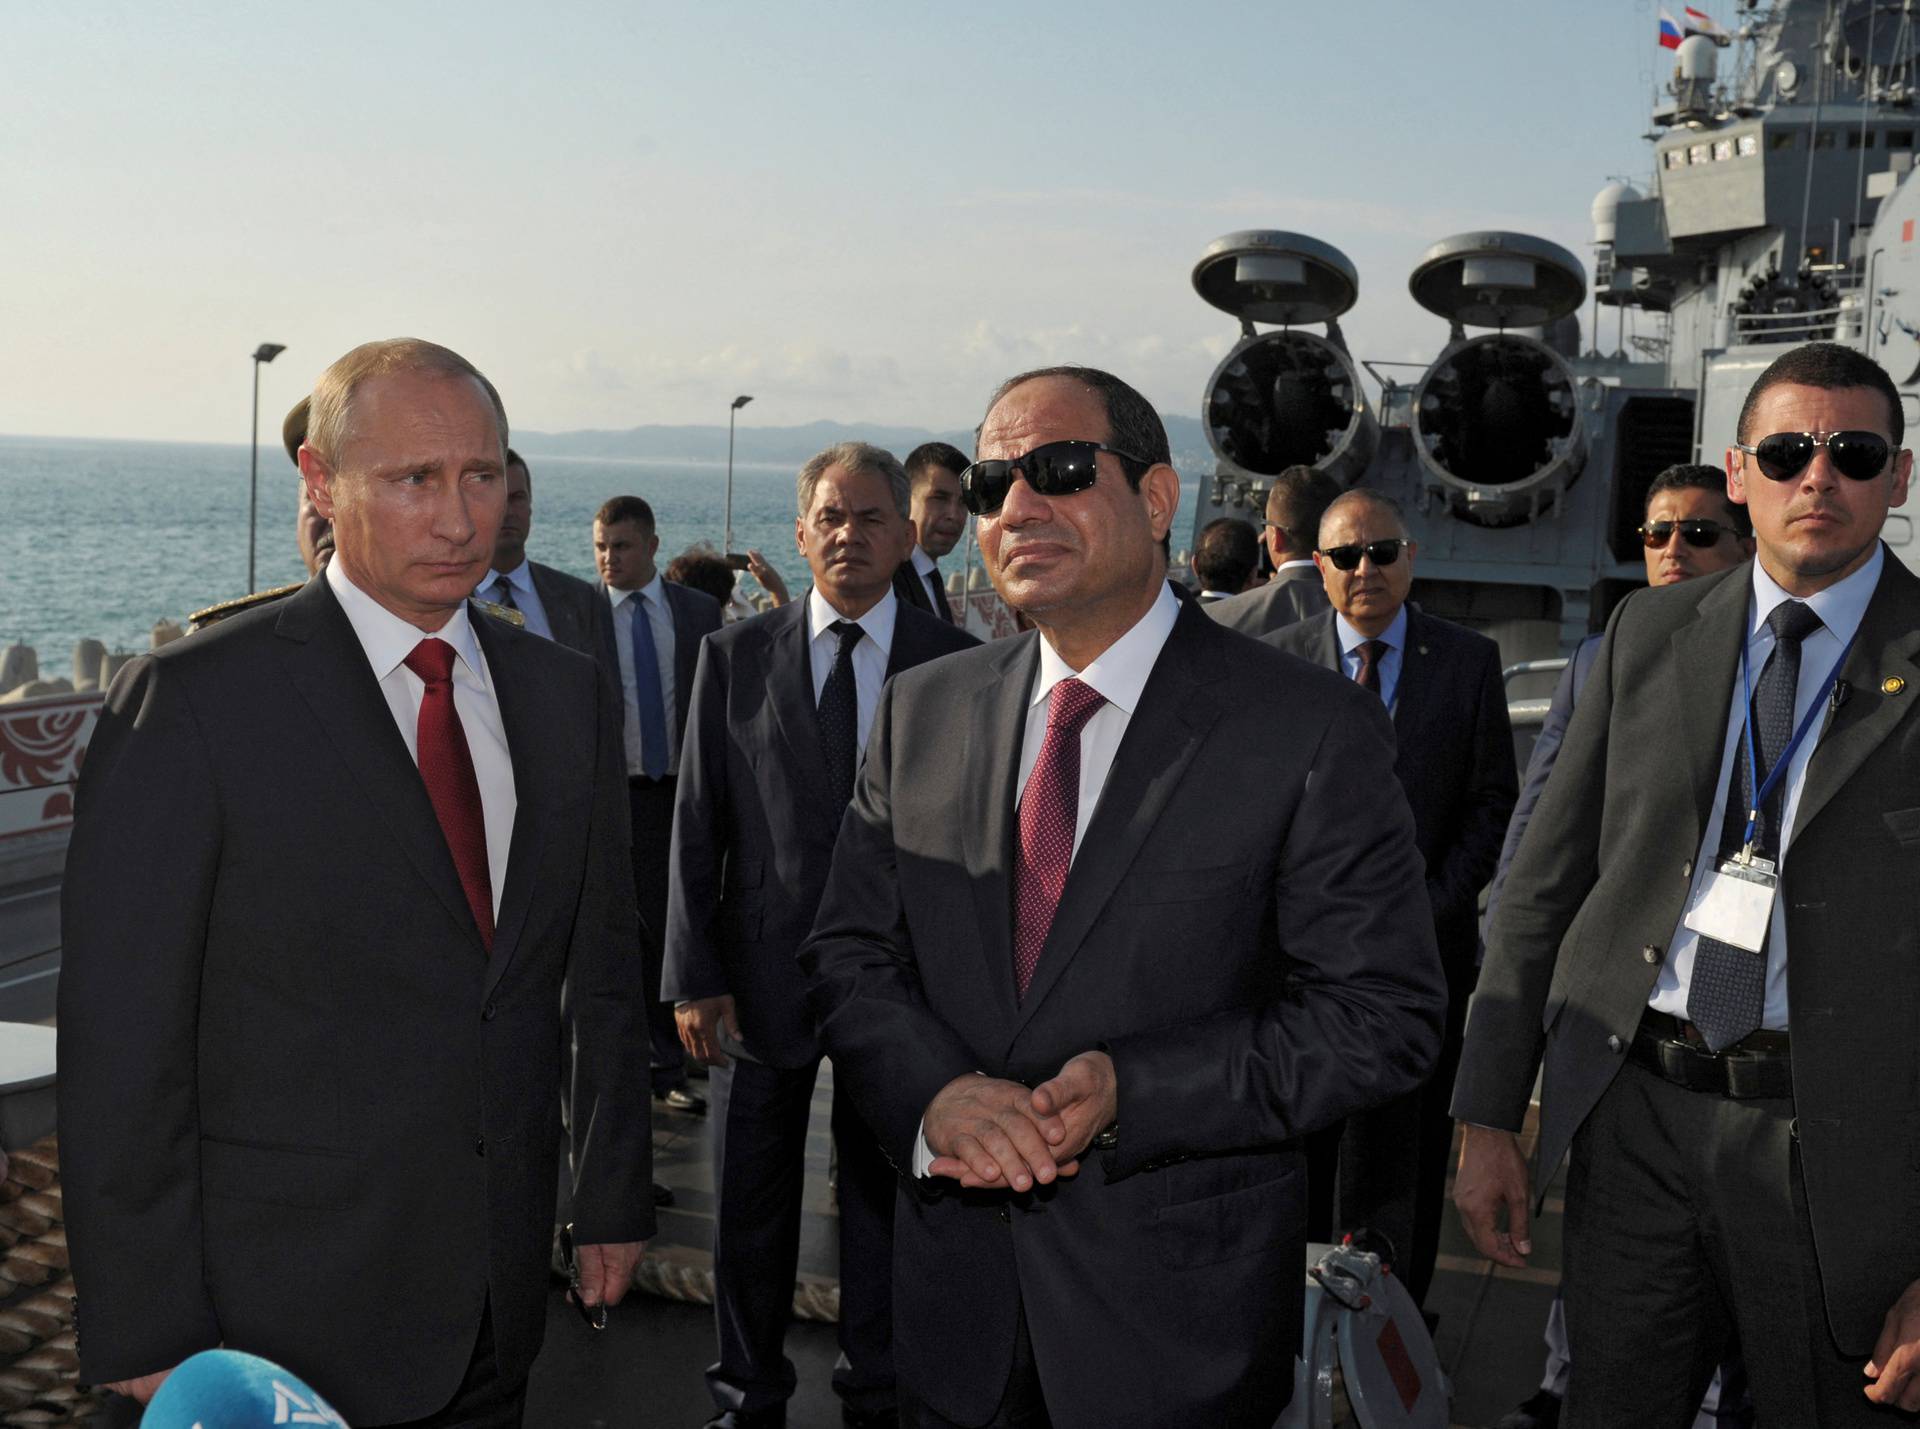 FILE PHOTO: Russia's President Putin and his Egyptian counterpart Sisi stand on the deck of guided missile cruiser Moskva in Sochi